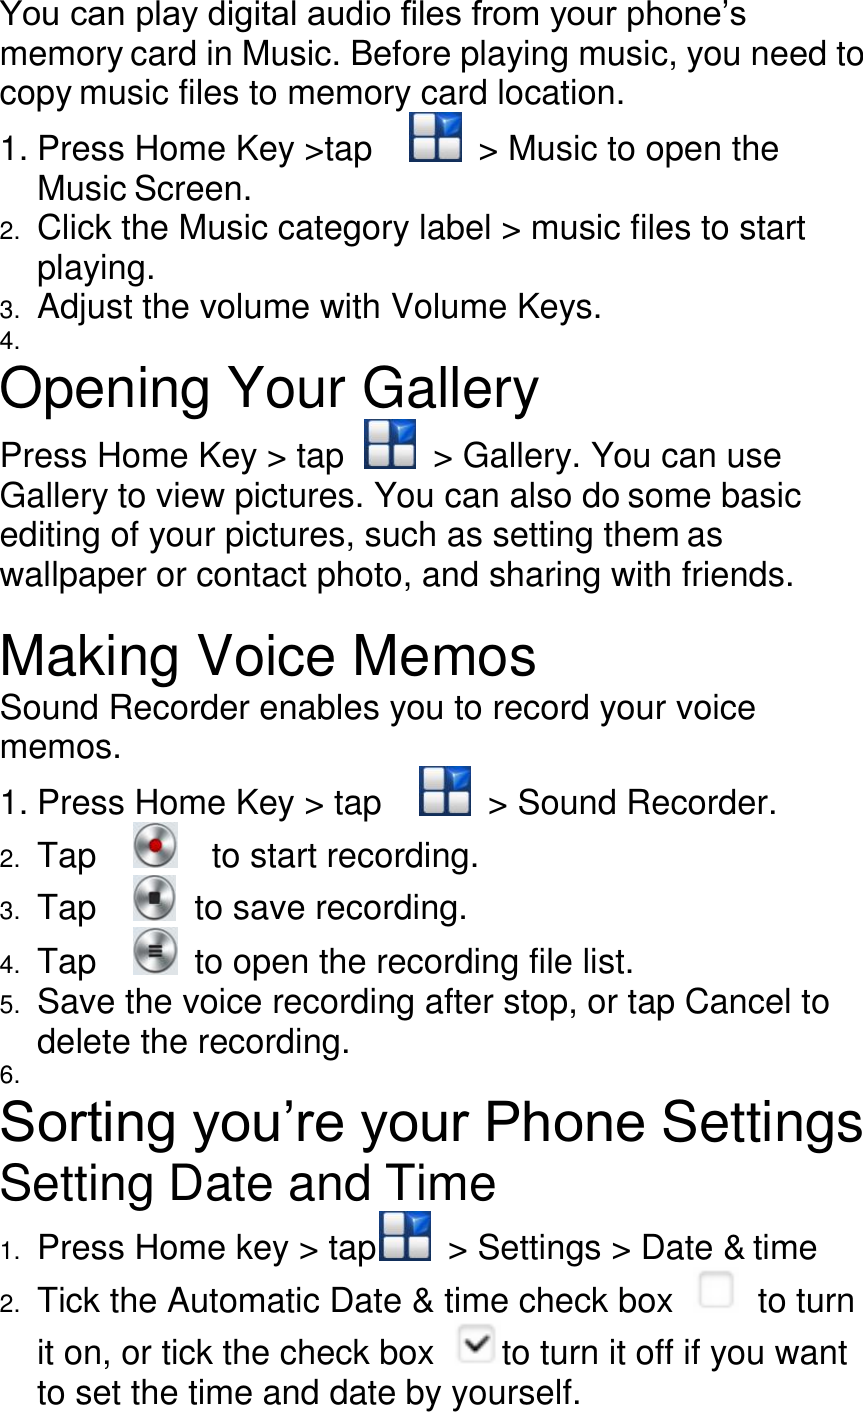 You can play digital audio files from your phone’s memory card in Music. Before playing music, you need to copy music files to memory card location. 1. Press Home Key &gt;tap      &gt; Music to open the Music Screen. 2. Click the Music category label &gt; music files to start playing. 3. Adjust the volume with Volume Keys. 4.   Opening Your Gallery Press Home Key &gt; tap    &gt; Gallery. You can use Gallery to view pictures. You can also do some basic editing of your pictures, such as setting them as wallpaper or contact photo, and sharing with friends.  Making Voice Memos Sound Recorder enables you to record your voice memos. 1. Press Home Key &gt; tap      &gt; Sound Recorder. 2. Tap      to start recording. 3. Tap      to save recording. 4. Tap      to open the recording file list. 5. Save the voice recording after stop, or tap Cancel to delete the recording. 6.   Sorting you’re your Phone Settings   Setting Date and Time 1. Press Home key &gt; tap   &gt; Settings &gt; Date &amp; time 2. Tick the Automatic Date &amp; time check box    to turn it on, or tick the check box  to turn it off if you want to set the time and date by yourself. 